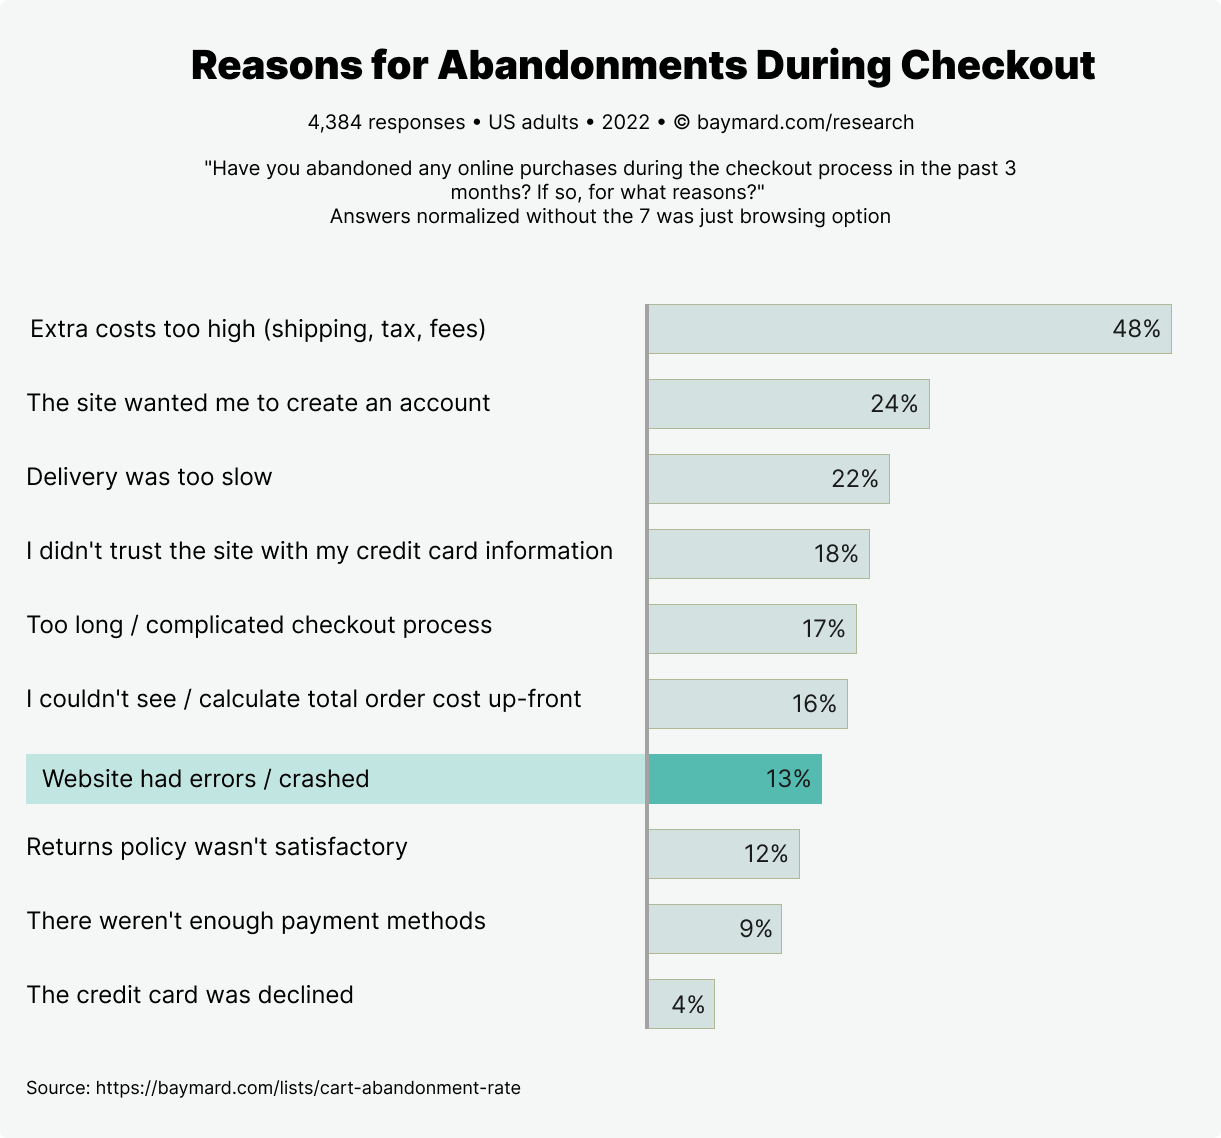 Reasons for Abandonments during checkout infographic